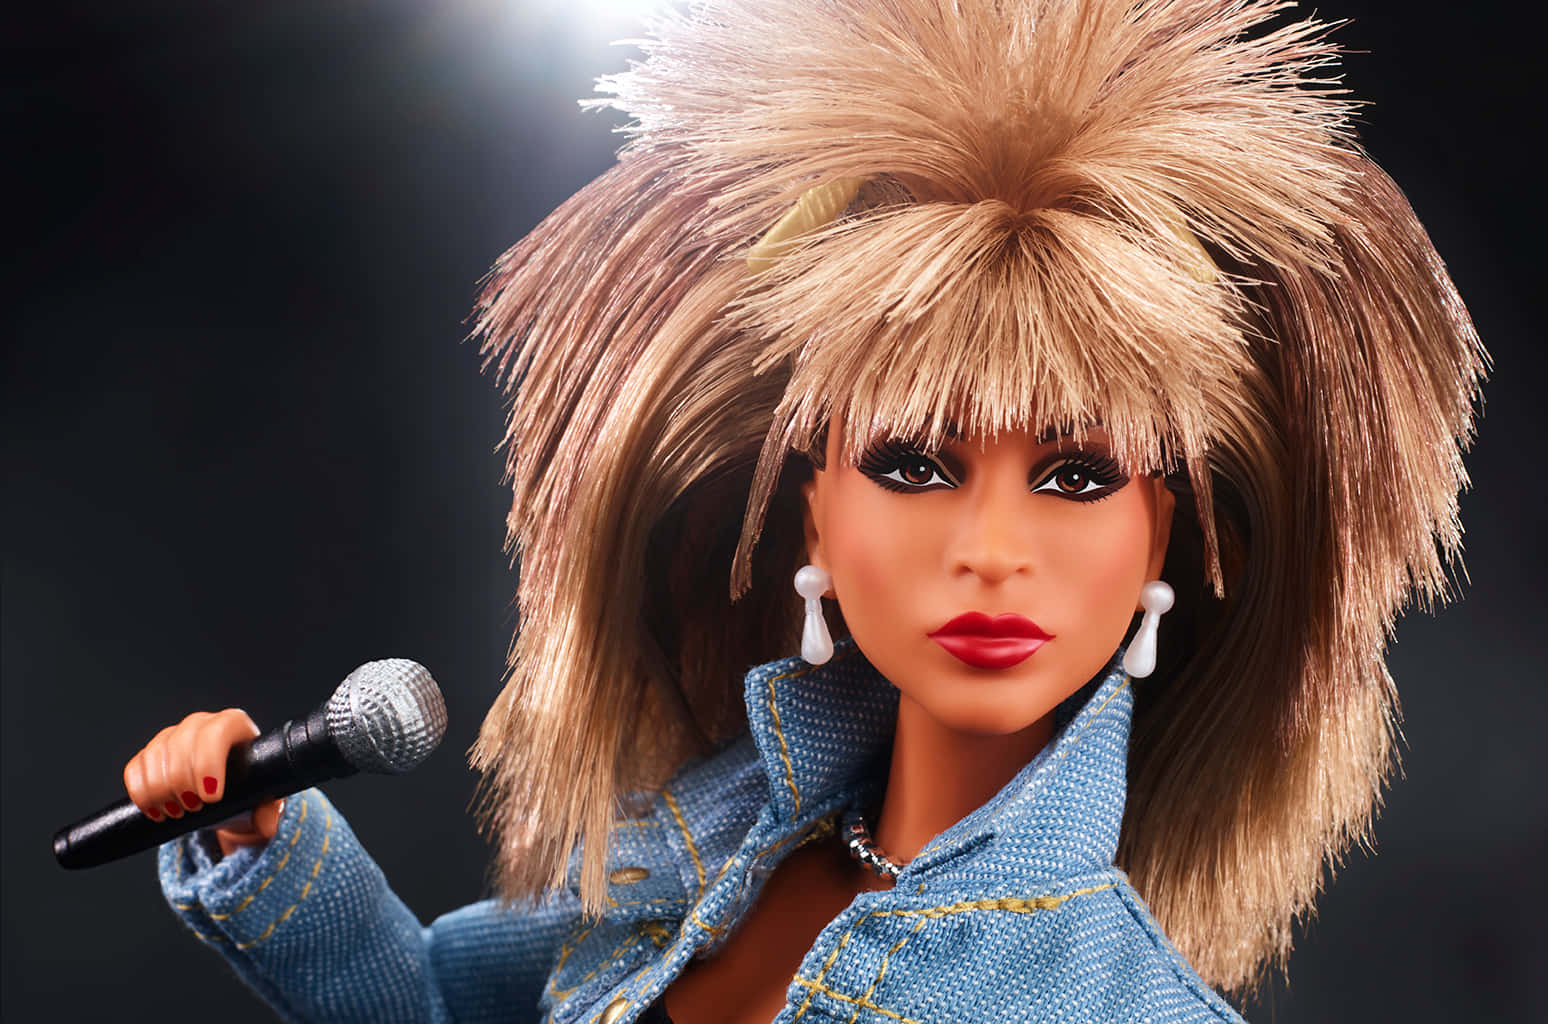 Barbie Doll With A Microphone And A Blond Hair